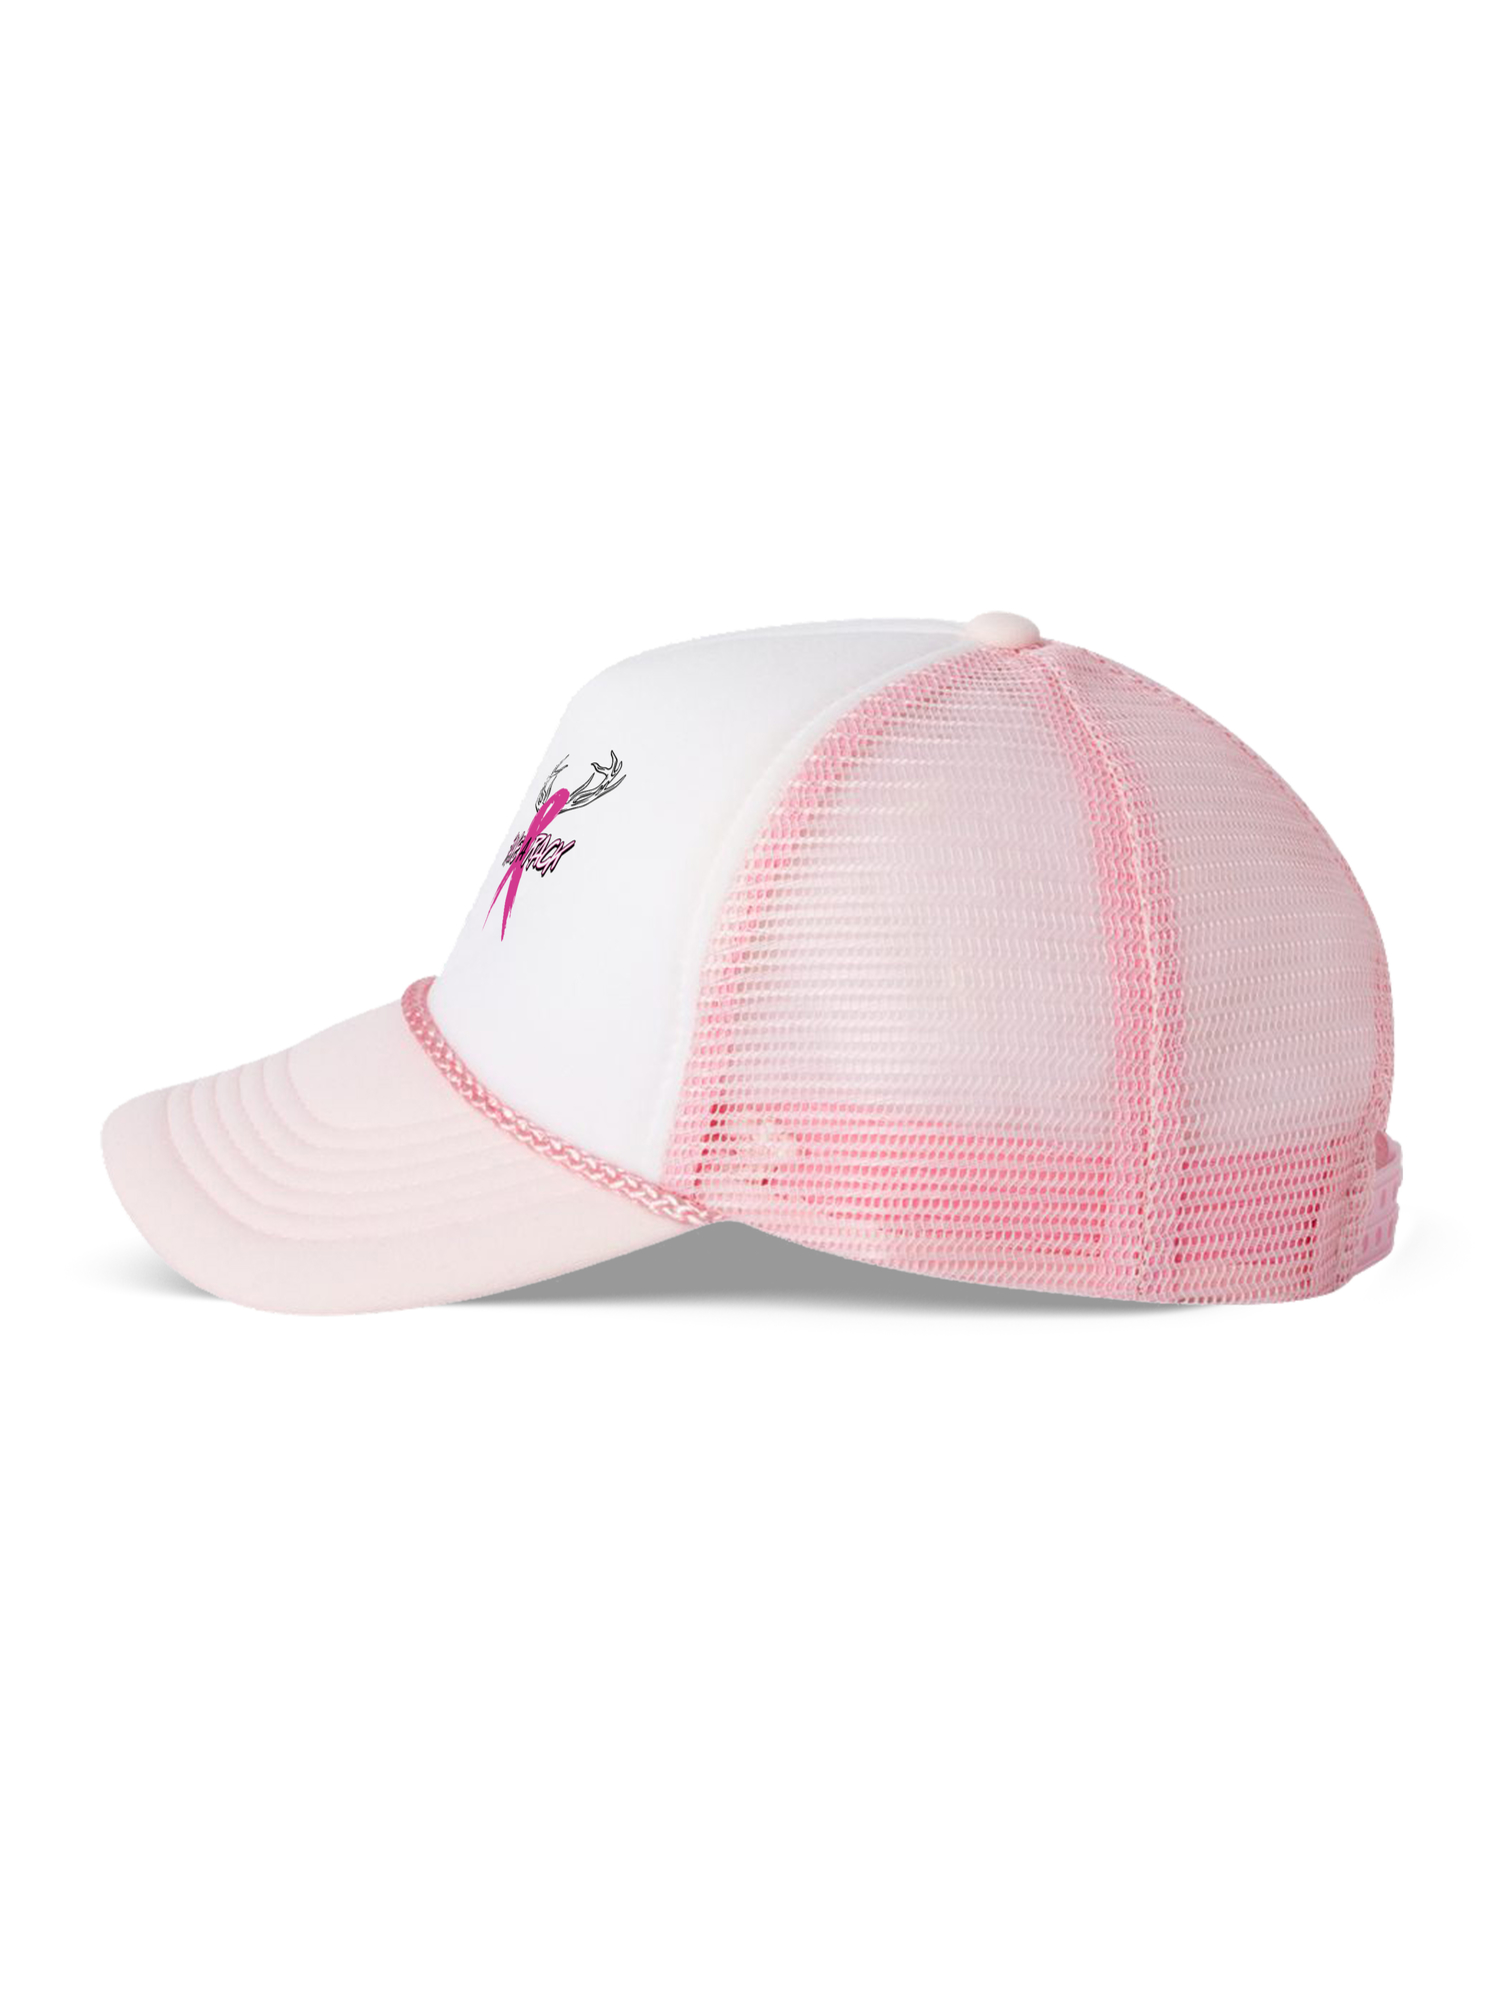 Awkward Styles Save A Rack Trucker Hat Breast Cancer Awareness Hats for Men and Women Pink Ribbon Baseball Hat Gifts for Cancer Survivor Cancer Awareness Headwear Breast Cancer Ribbon Dad Hat - image 3 of 6